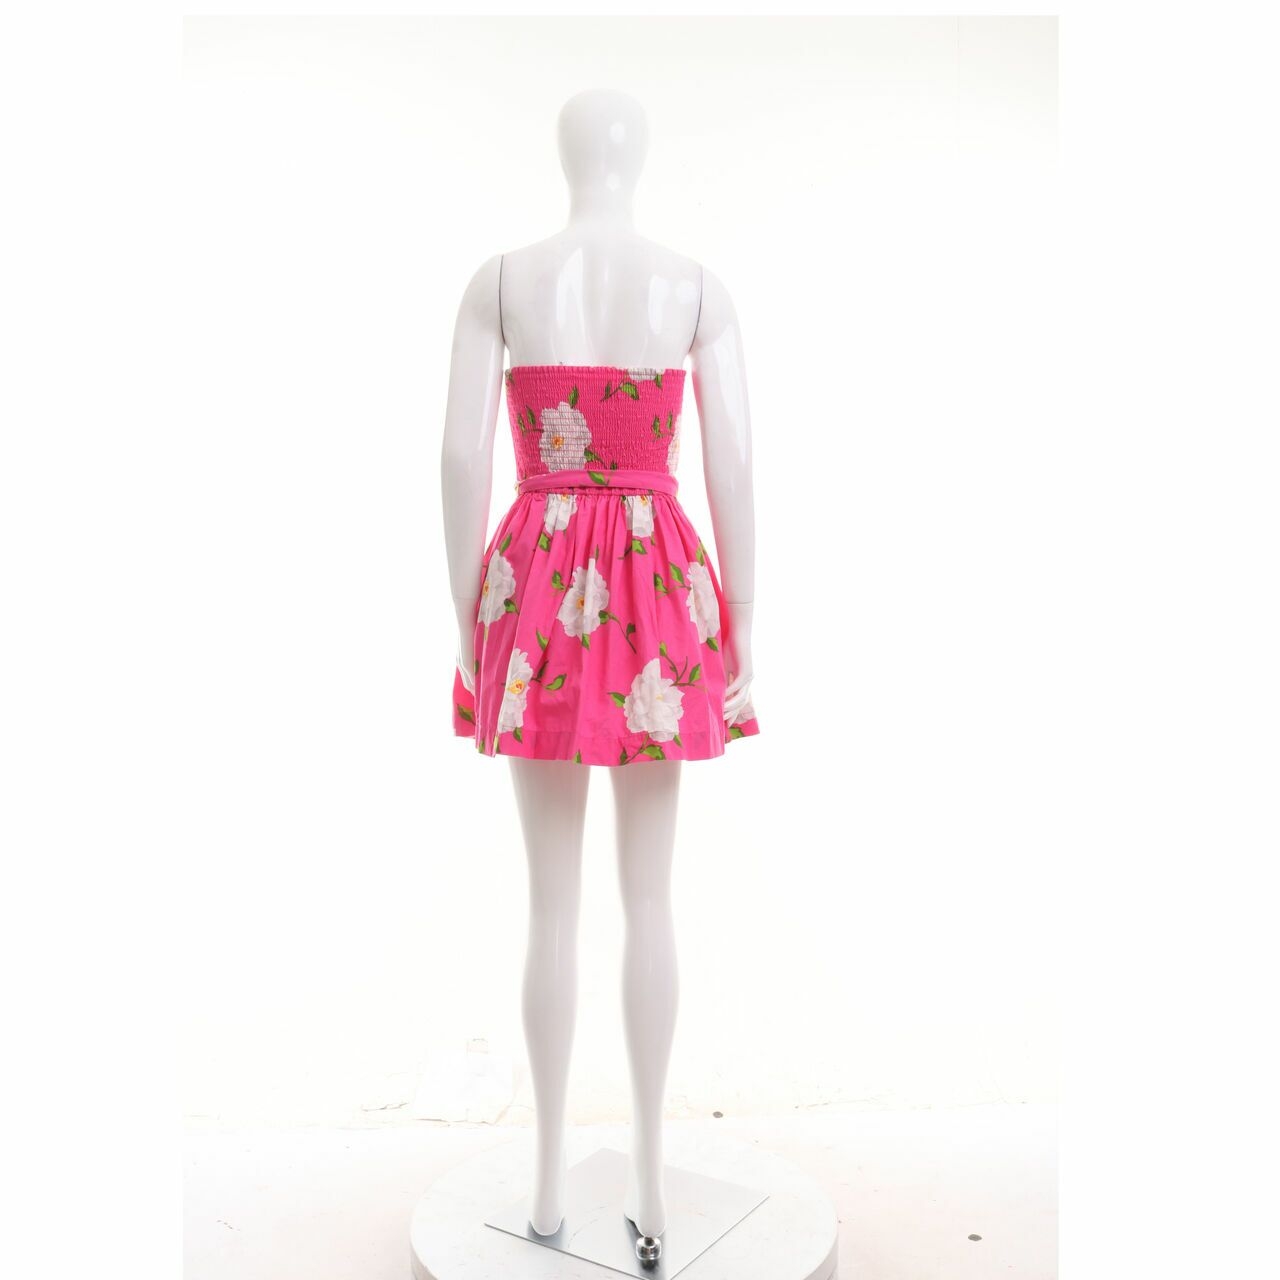 Abercrombie & Fitch Pink Floral Tube Mini Dress